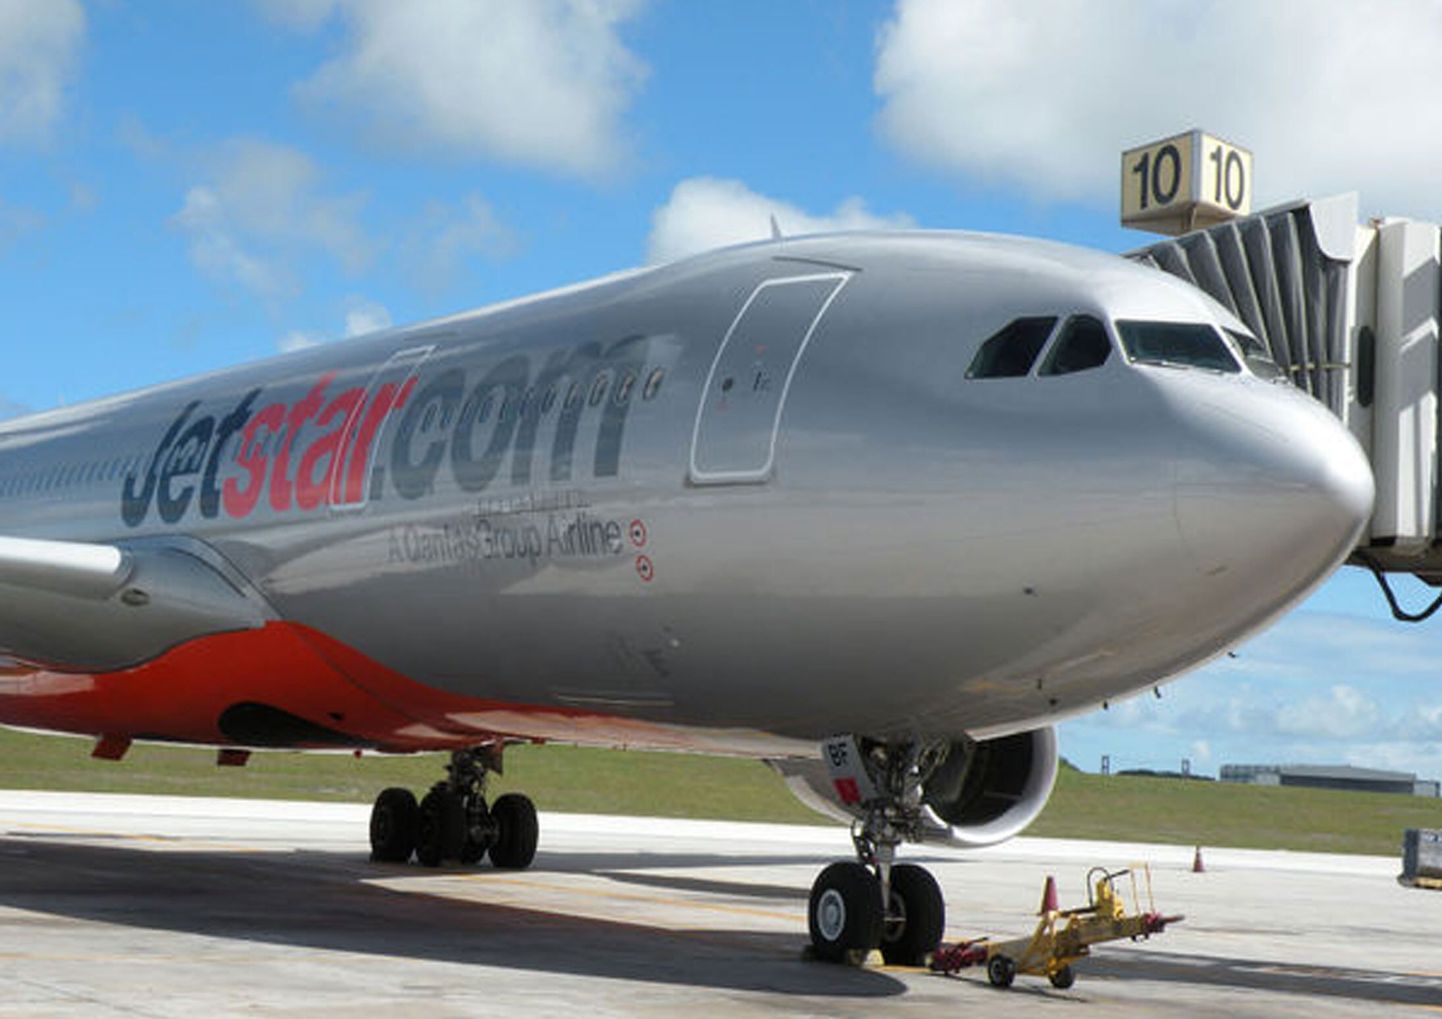 This photo provided by Guam radio and television broadcaster KUAM on June 11, 2009 shows a Jetstar Airbus A330-200 passenger jet sitting on the tarmac of Guam's international airport in Hagatna (formerly known as Agana) the day after in made an emergency landing during its flight from Japan to Australia.   Jetstar's flight JQ20 carrying 203 mostly Japanese passengers was about four hours into its journey from Osaka to the Gold Coast when the blaze broke out in the cockpit, prompting the captain to douse the flames with a fire extinguisher before diverting to Guam.   MANDATORY CREDIT: KUAM News    RESTRICTED TO EDITORIAL NEWS   GETTY OUT  NO COMMERICAL SALES     AFP PHOTO / KUAM News